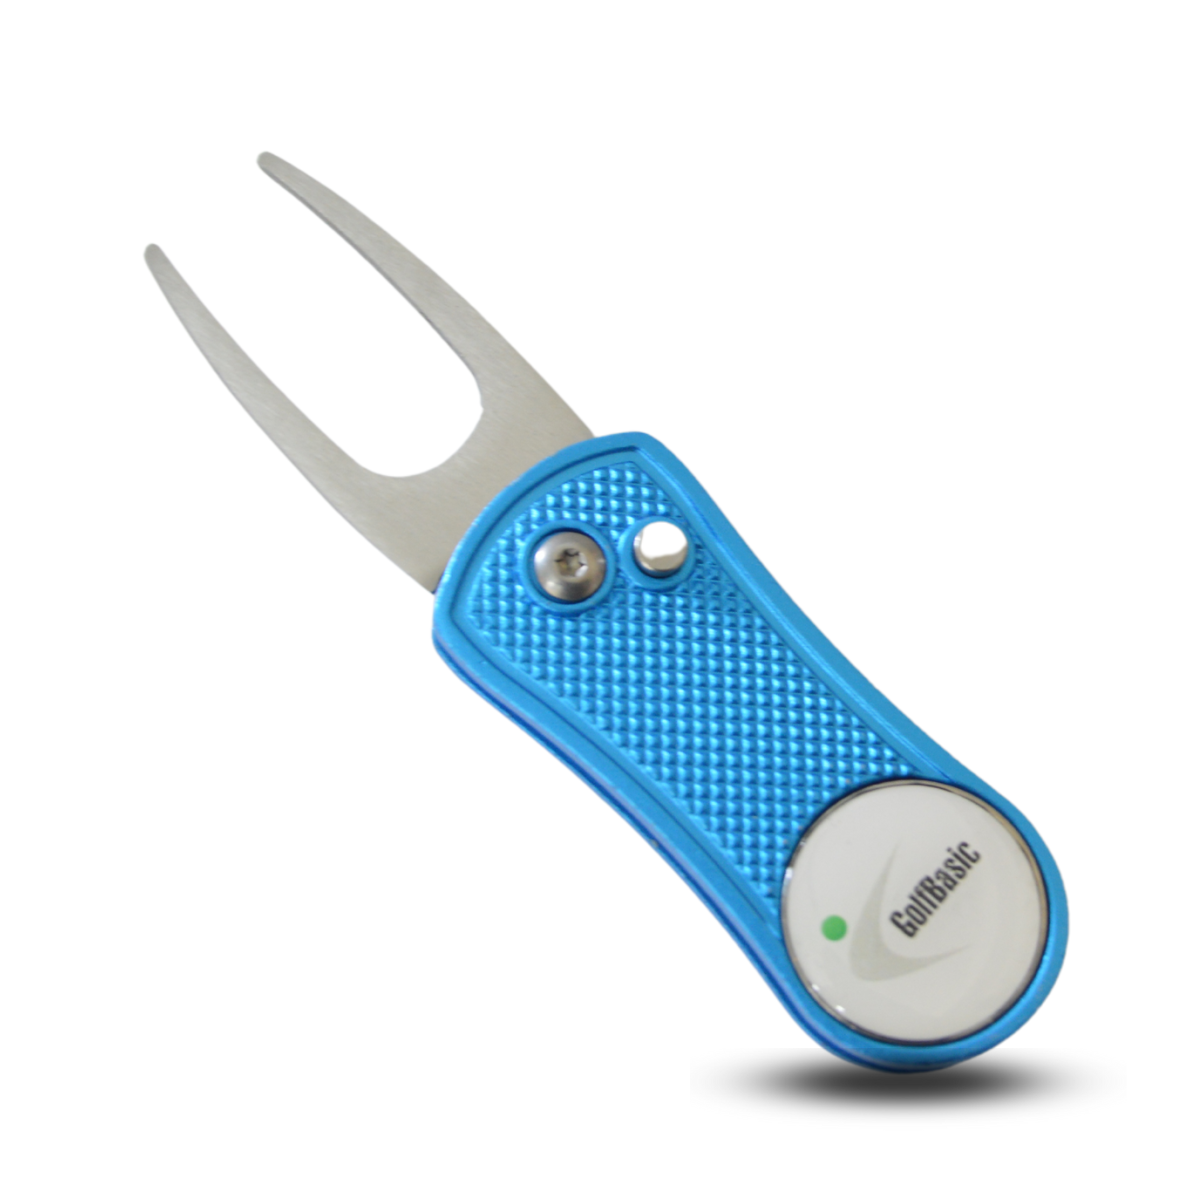 GolfBasic Divot Tool with Pop-Up Button & Magnetic Ball MarkerGolfBasic Divot Tool with Pop-Up Button & Magnetic Ball MarkerGolfBasic Divot Tool with Pop-Up Button & Magnetic Ball MarkerGolfBasic Divot Tool with Pop-Up Button & Magnetic Ball MarkerGolfBasic Divot Tool with Pop-Up Button & Magnetic Ball MarkerGolfBasic Divot Tool with Pop-Up Button & Magnetic Ball Marker